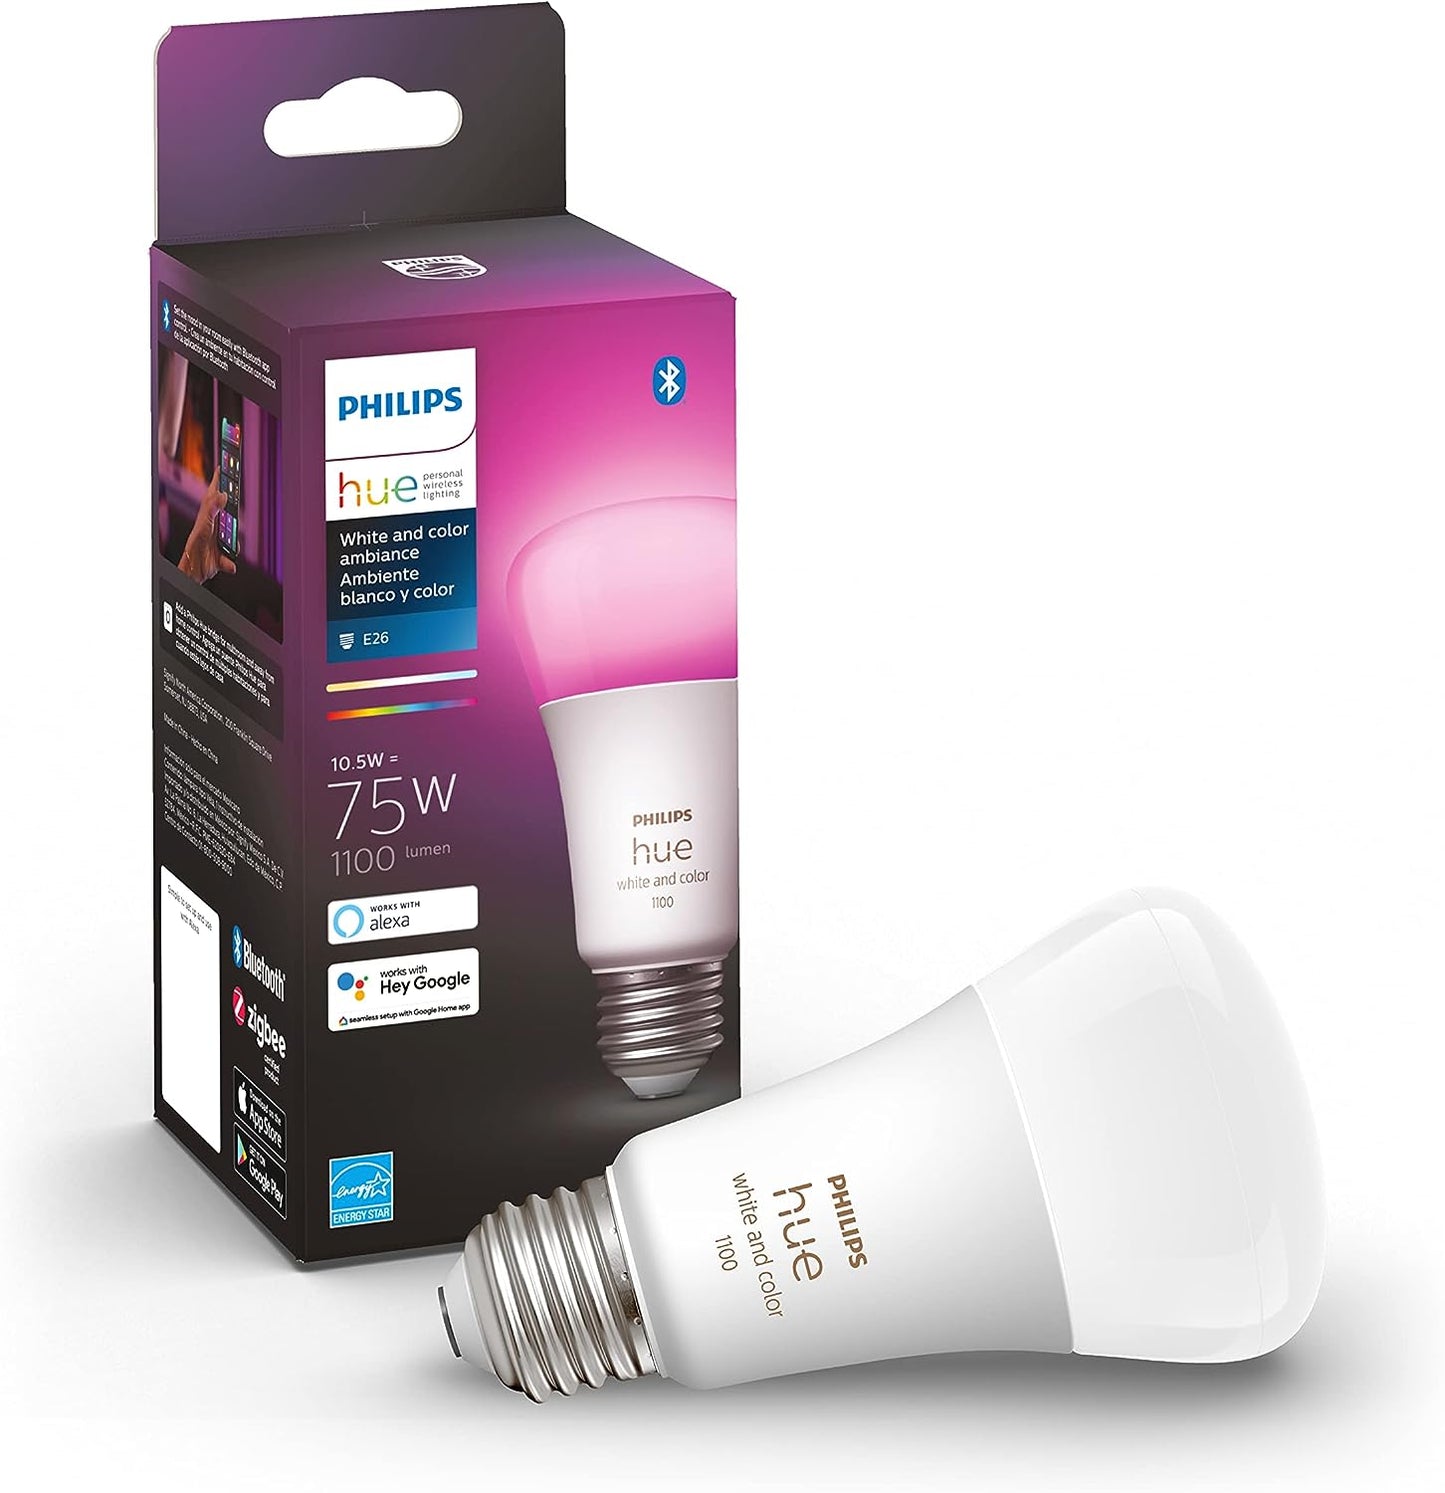 Philips Hue White and Color A19 Medium Lumen Smart Bulb, 1100 Lumens, Bluetooth & Zigbee Compatible (Hue Hub Optional), Compatible with Alexa & Google Assistant